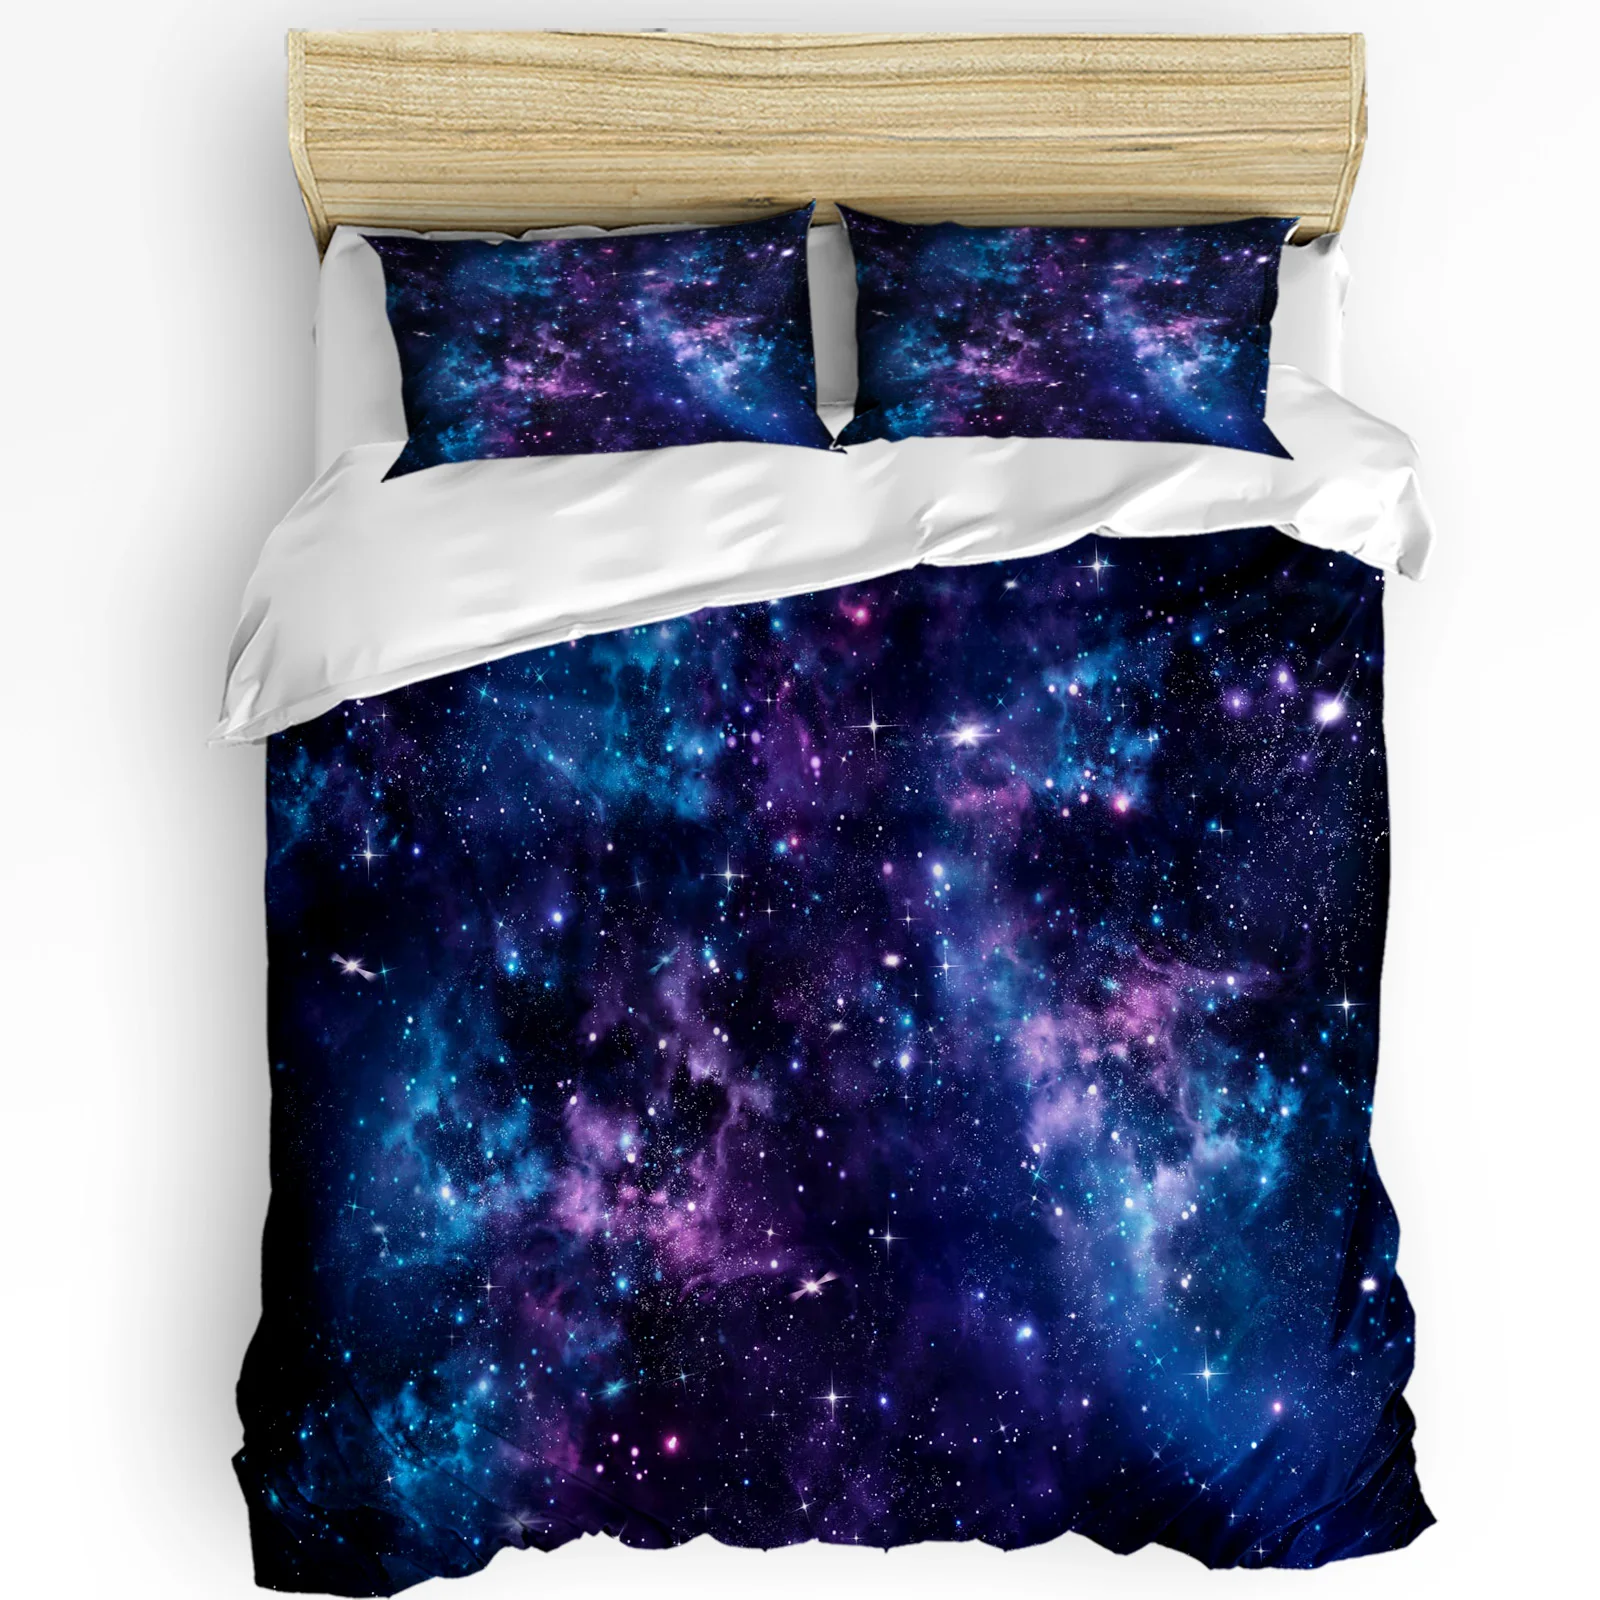 

Blue Starry Sky Purple Milky Way 3pcs Bedding Set For Bedroom Double Bed Home Textile Duvet Cover Quilt Cover Pillowcase